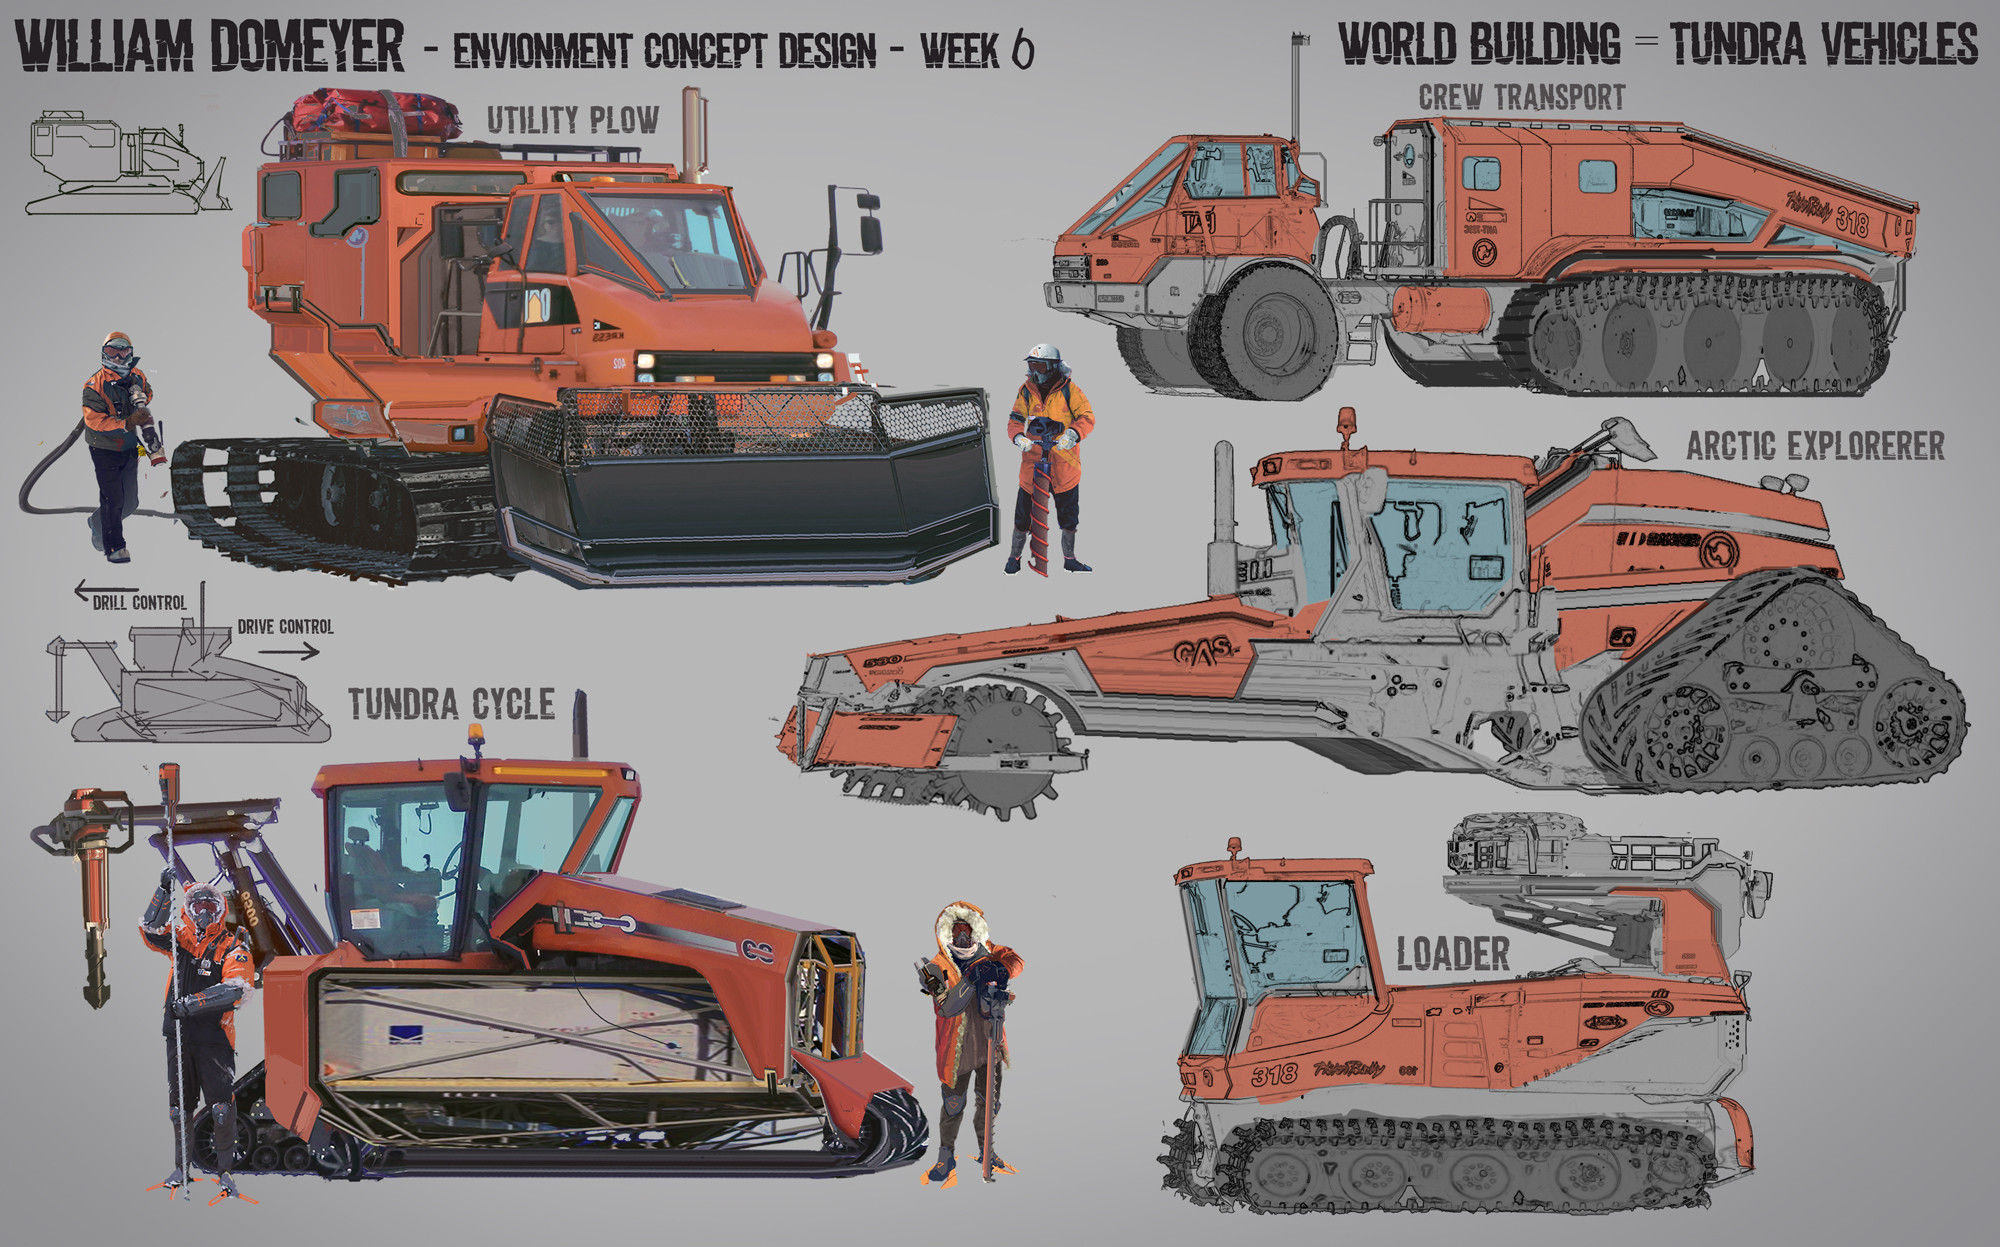 Vehicle designs that would fit within the Frozen Wastes